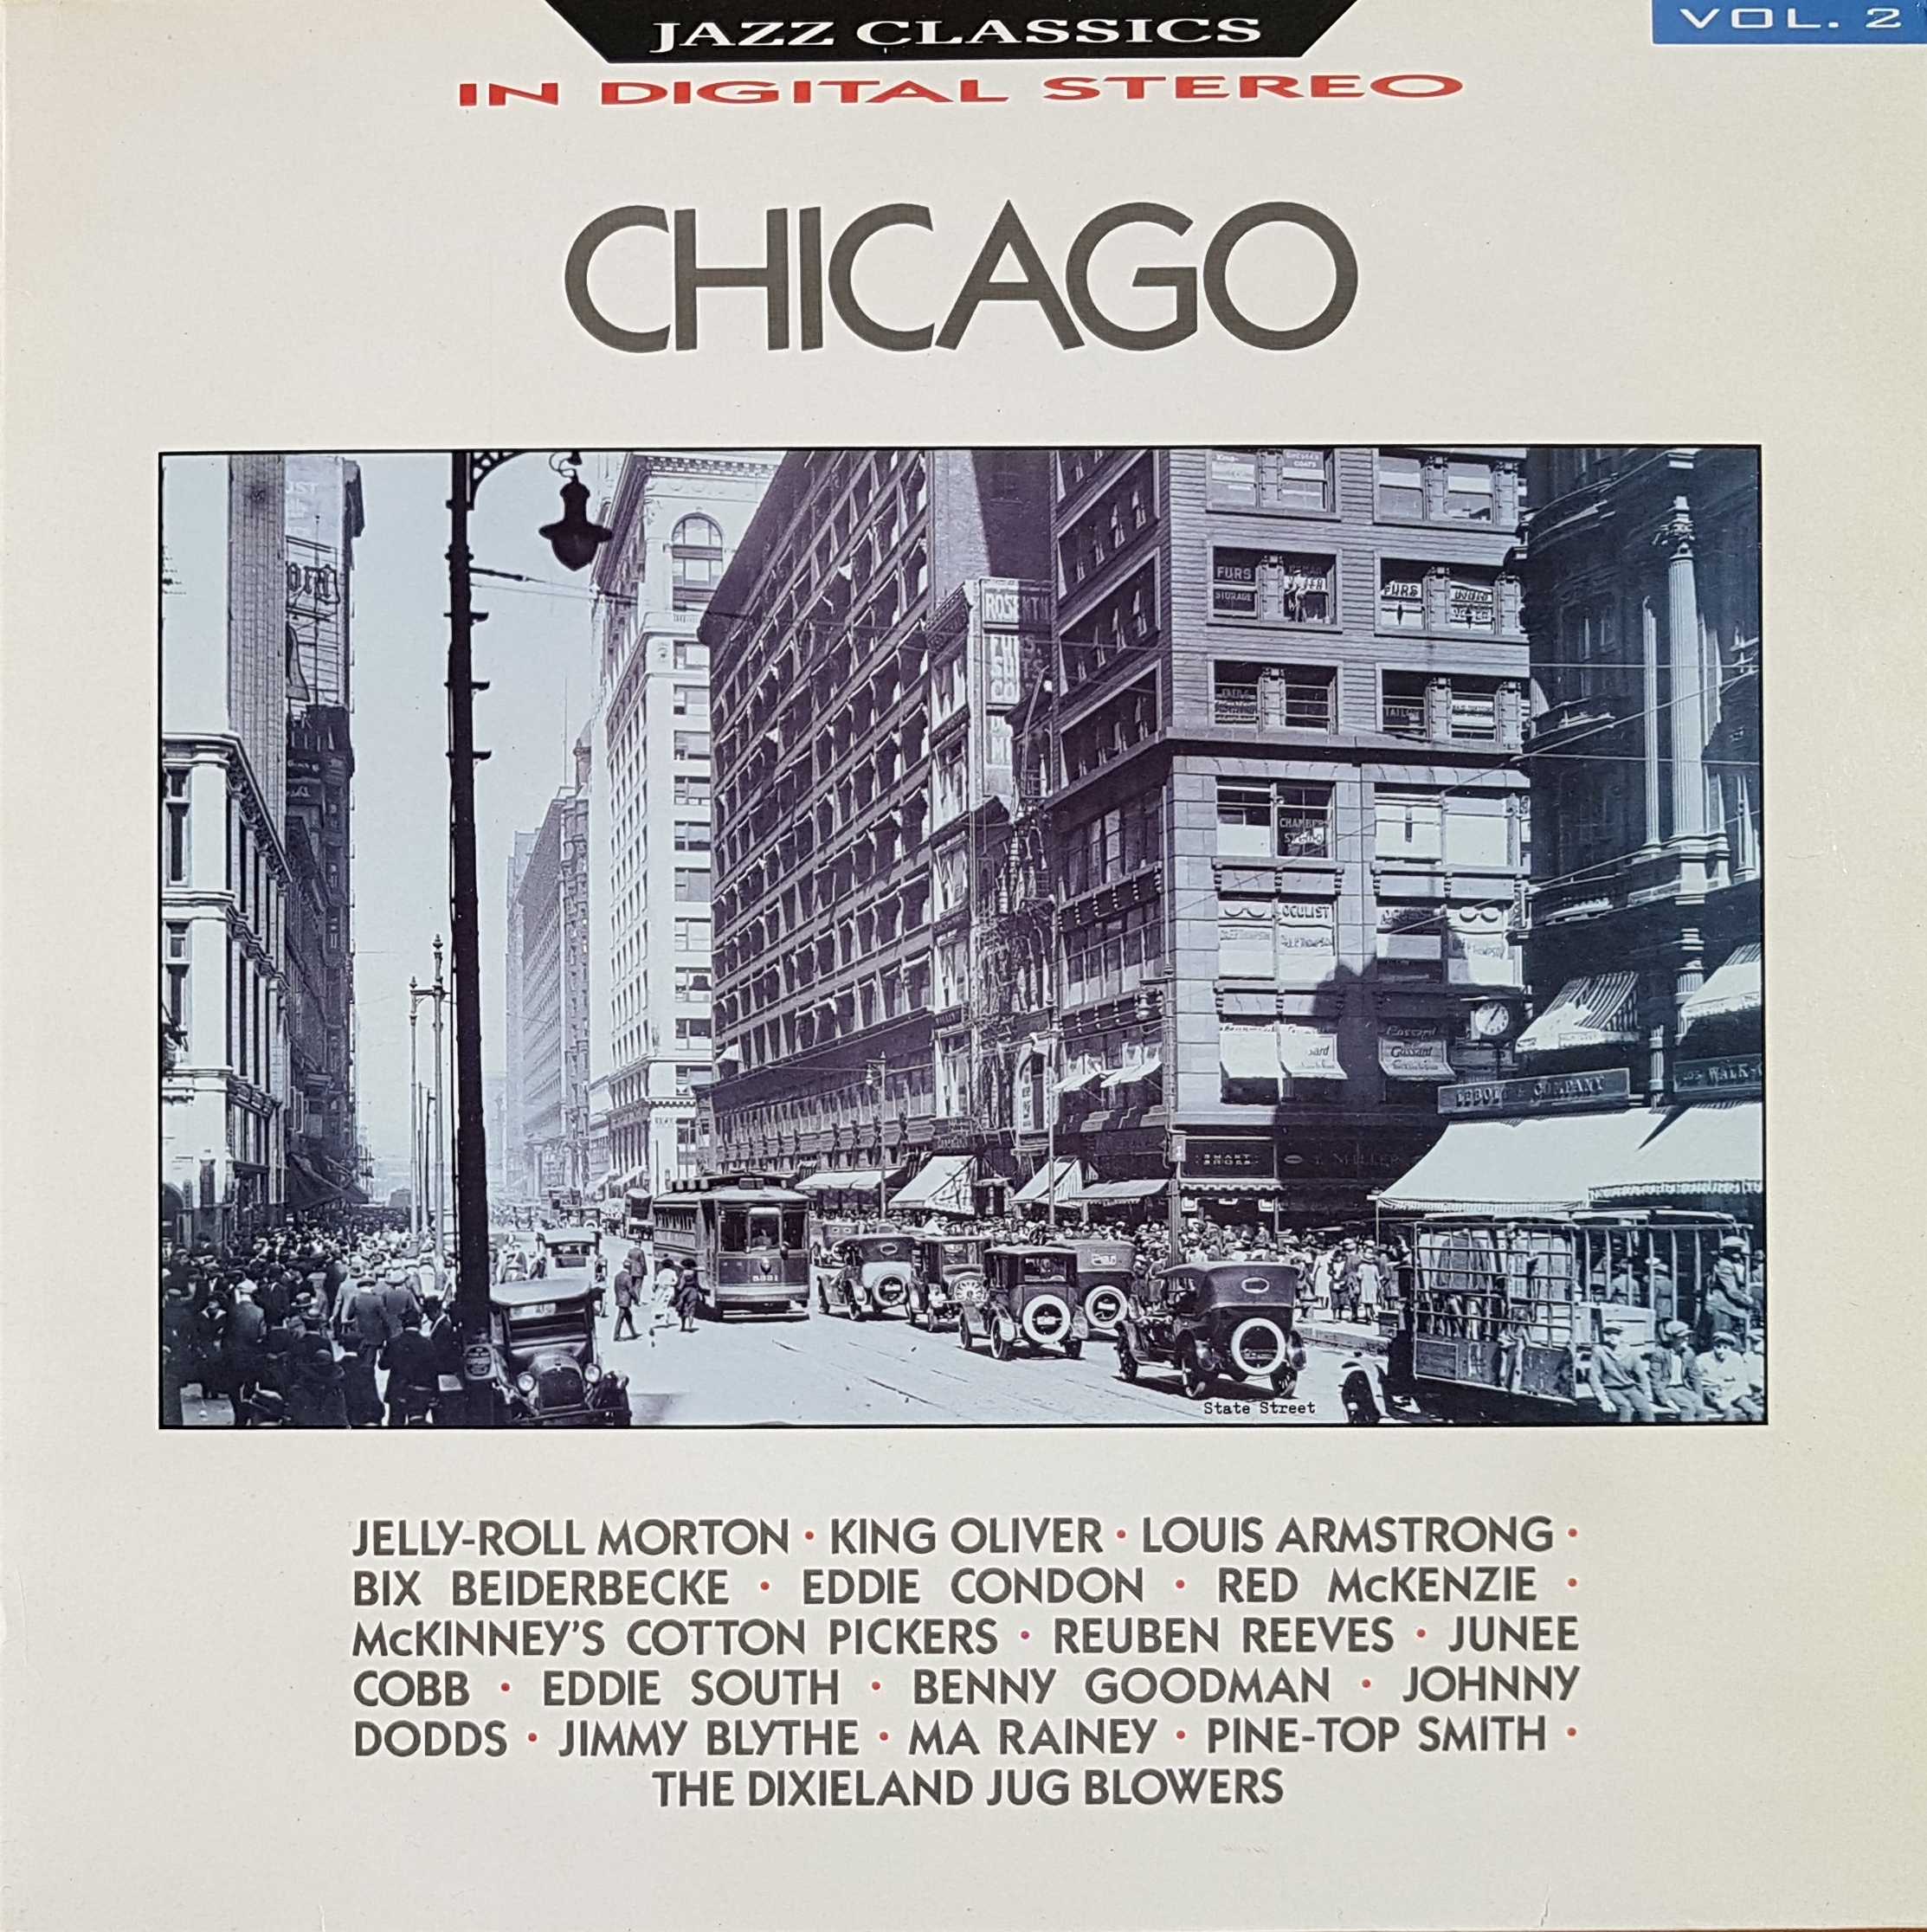 Picture of REB 589 Jazz Classics - Volume 2, Chicago by artist Various from the BBC albums - Records and Tapes library